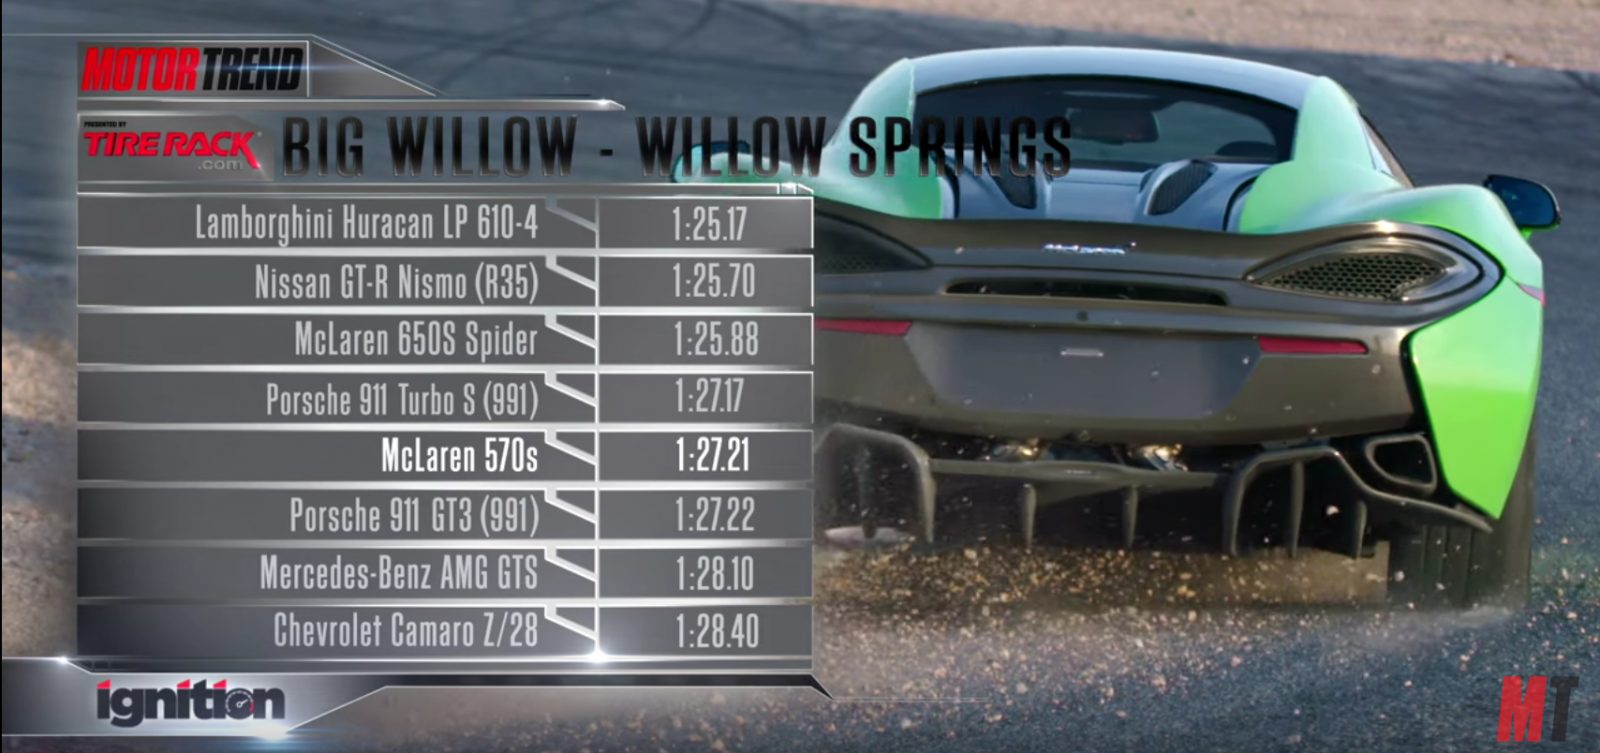 image motor trend ignition track times 570s